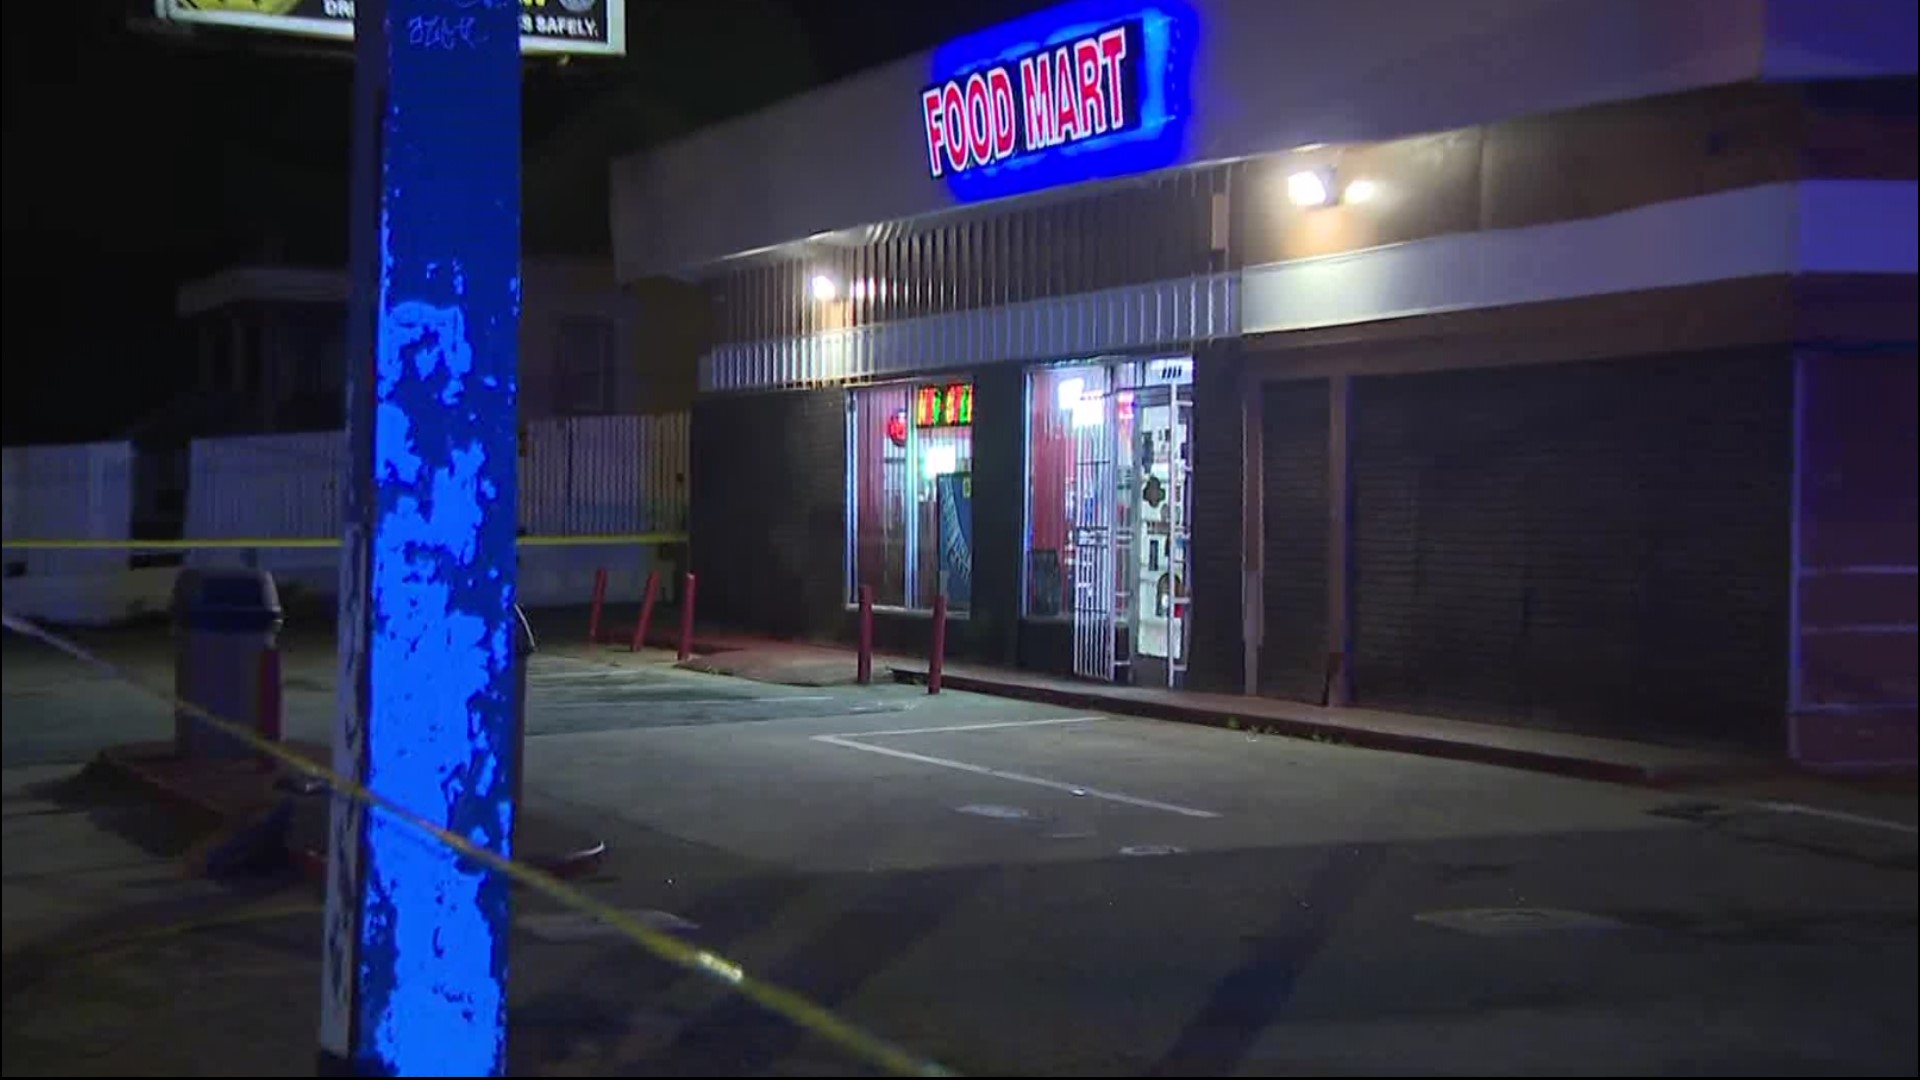 A man died after being shot at a convenience store Tuesday evening, according to the Atlanta Police Department.